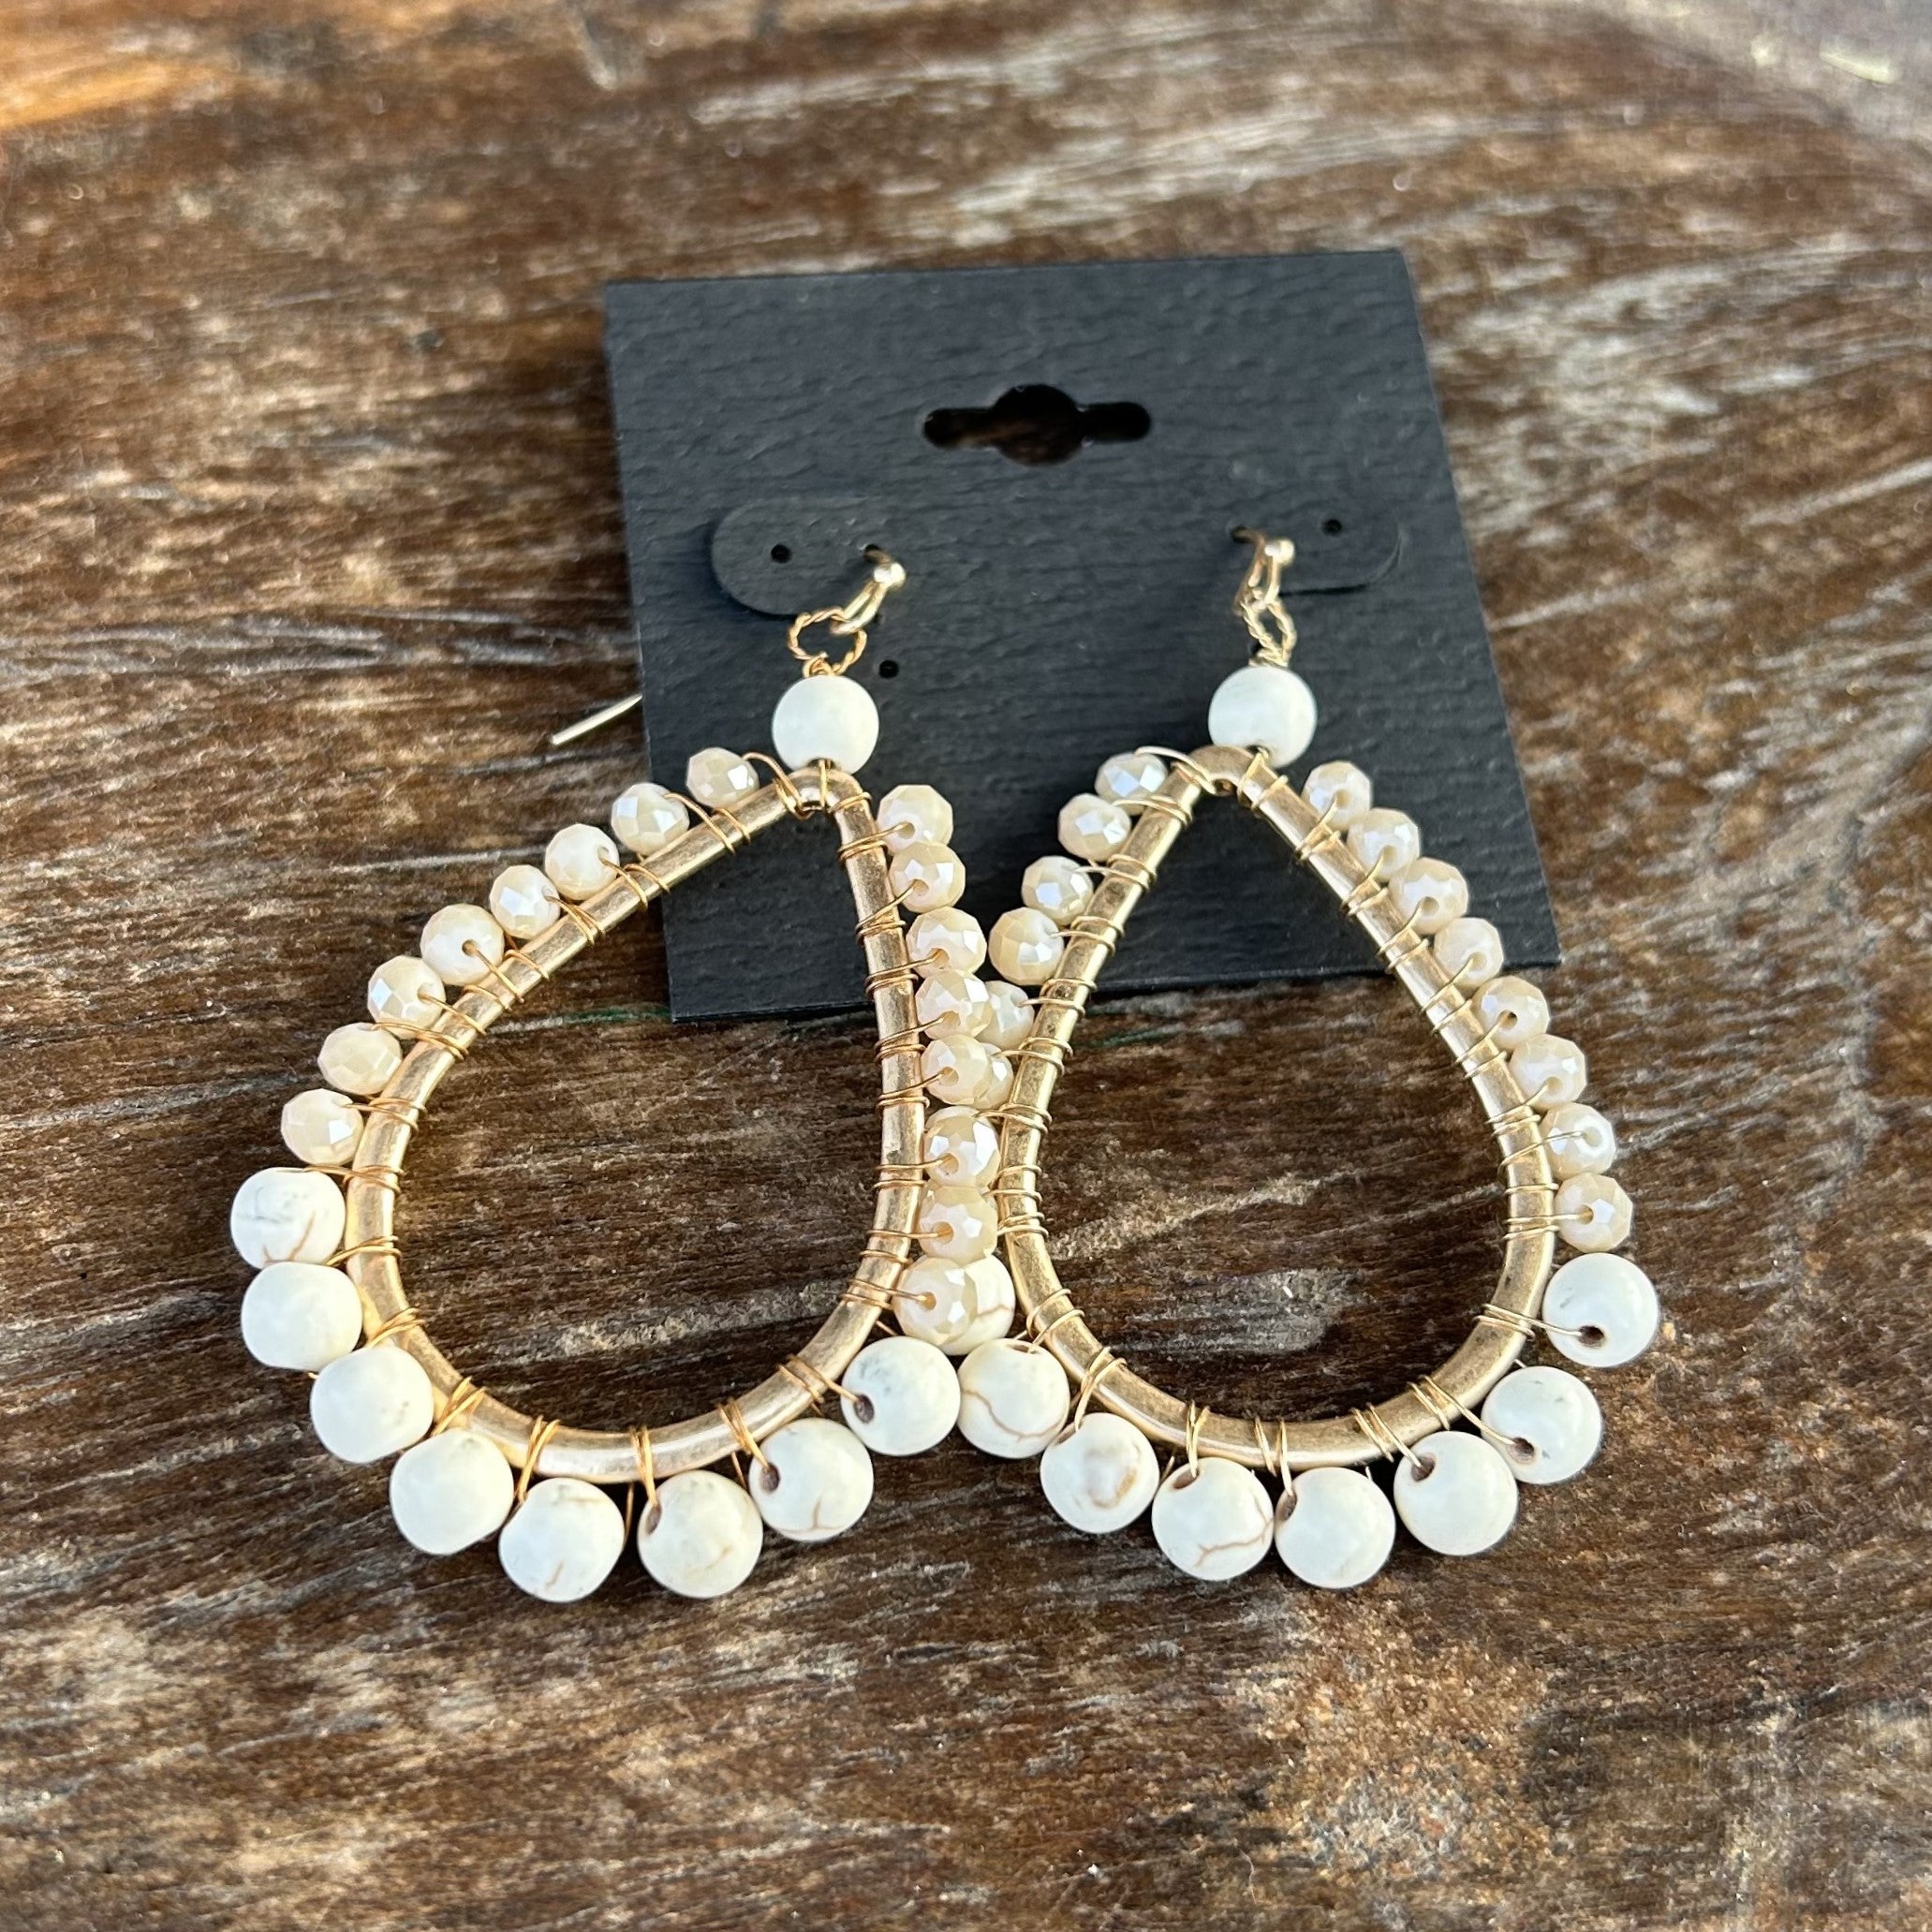 Introducing our lovely Teardrop Beaded Earrings! Trimmed in gold and featuring a teardrop shape covered in beads and sparkling crystals, these earrings will add a touch of luxury to any outfit. With multiple color options, you can easily match them to your ensemble. 